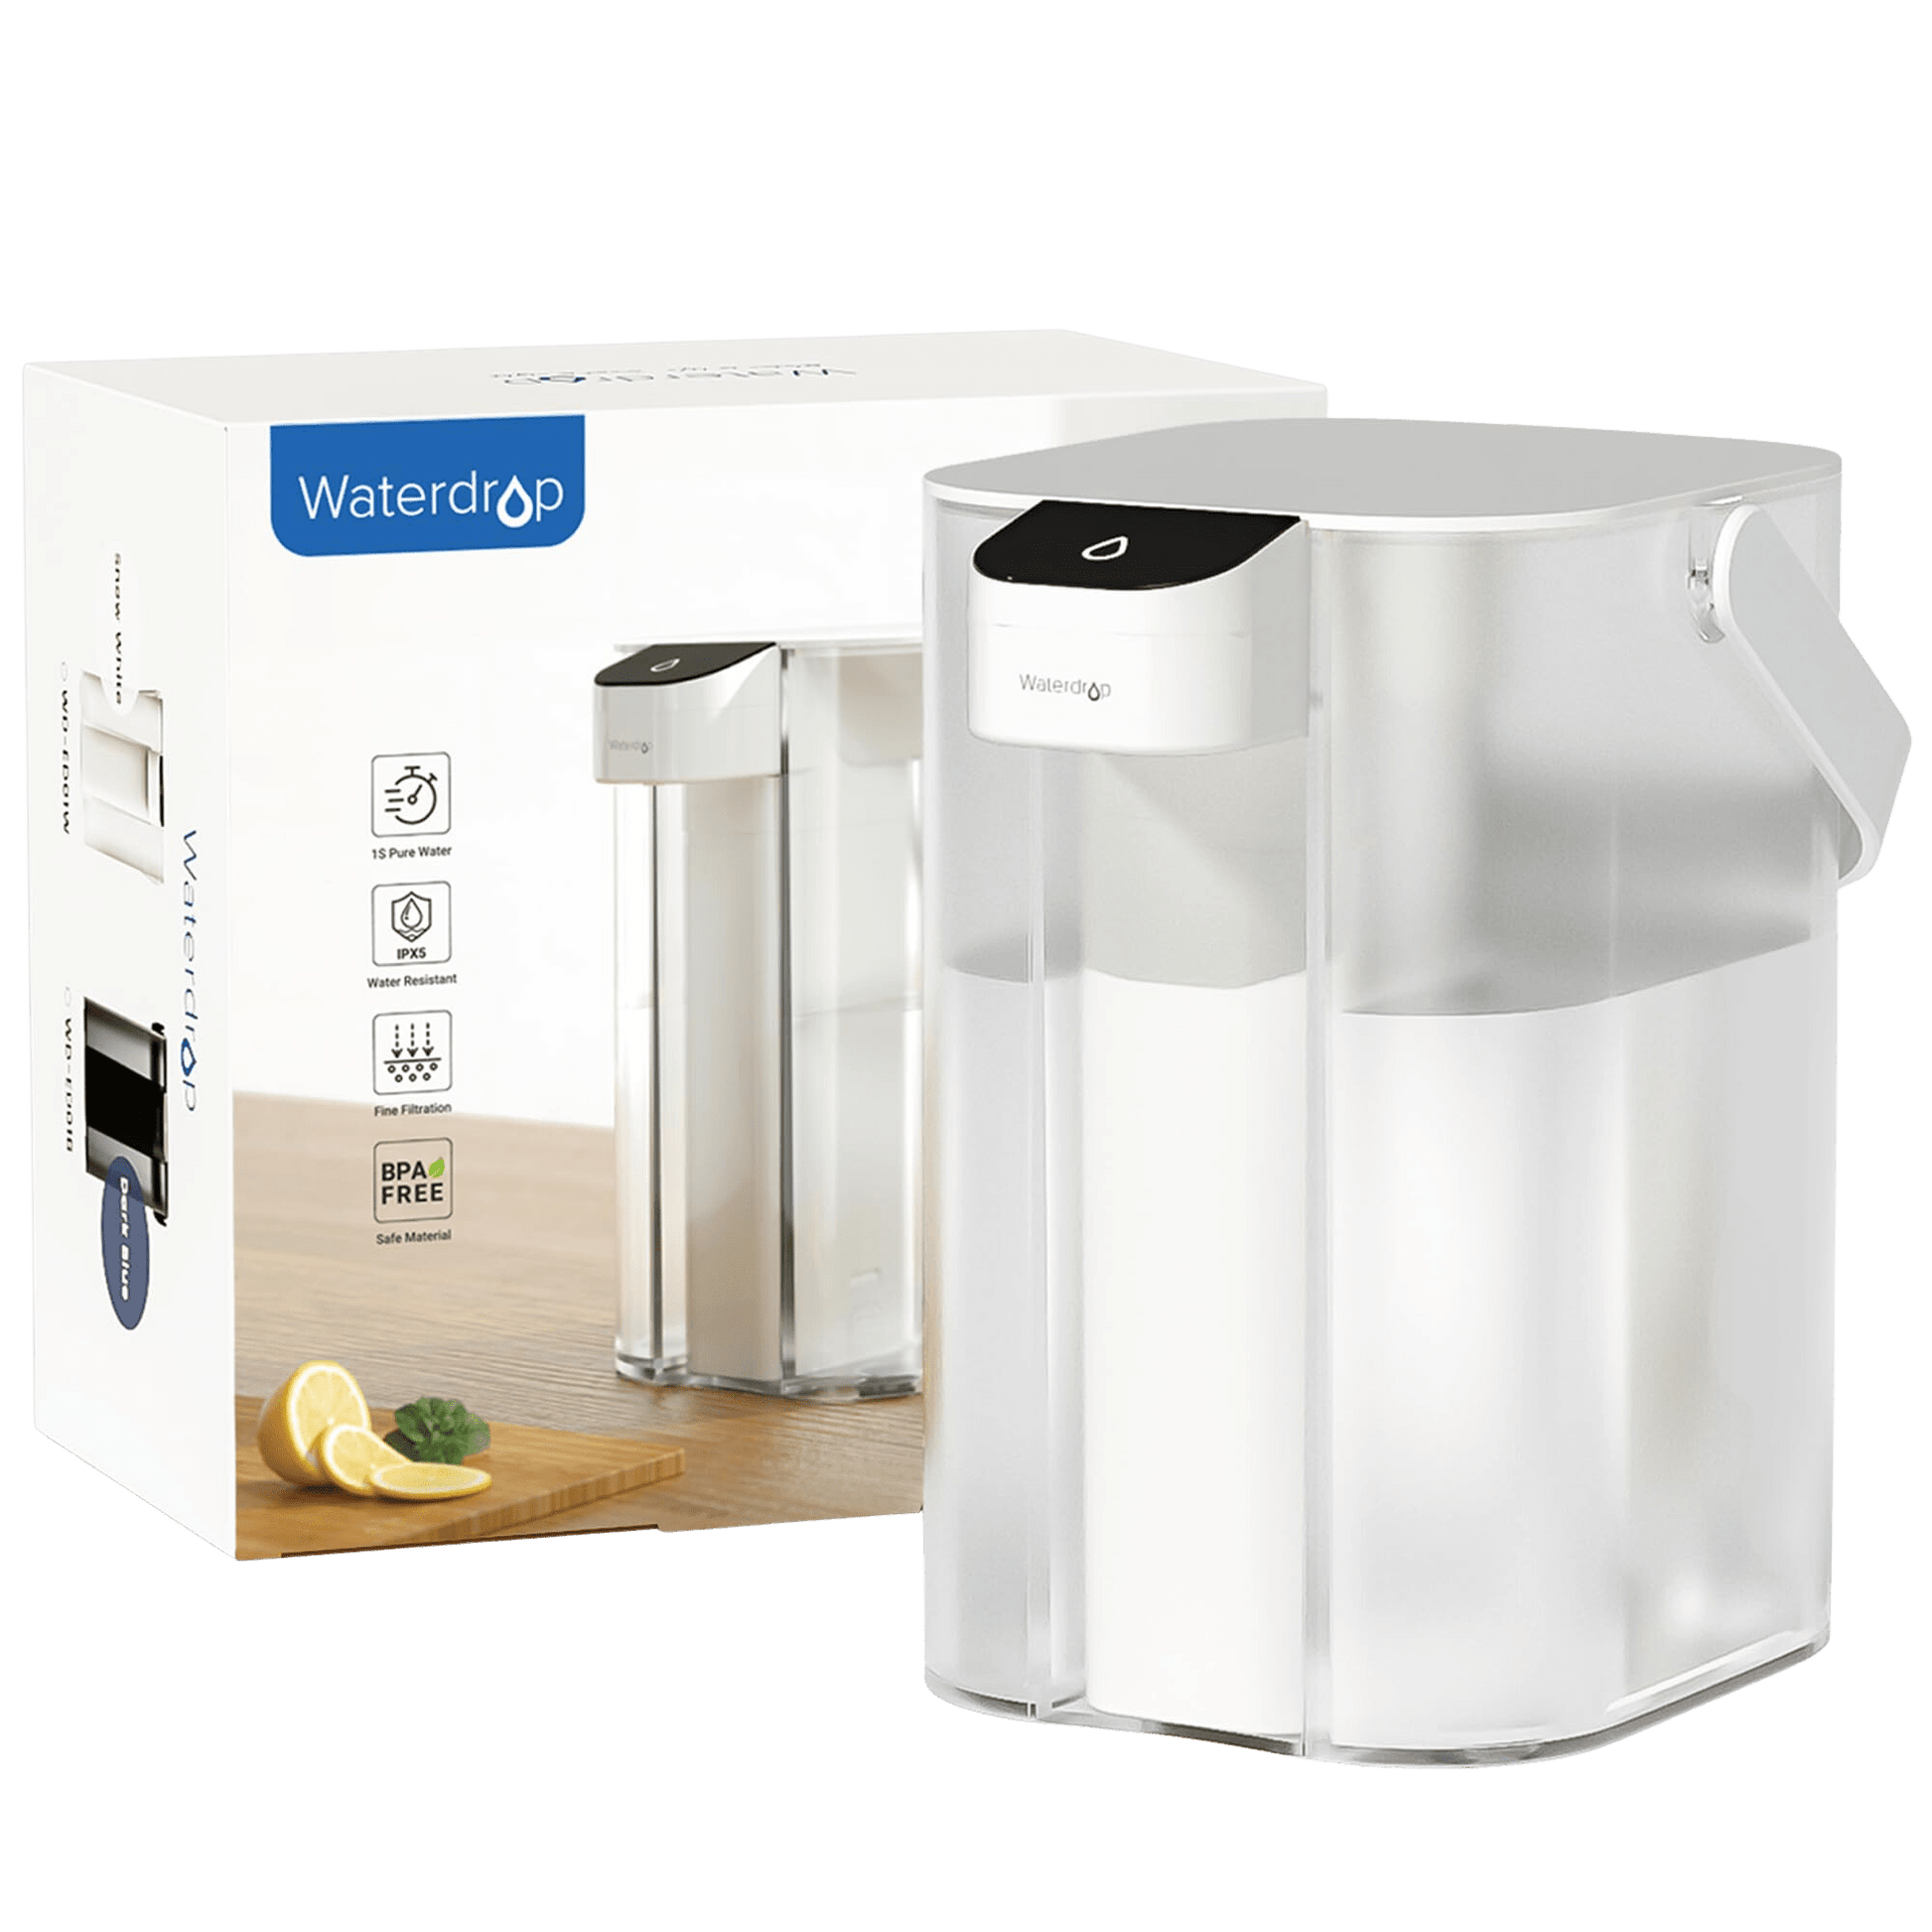 Waterdrop Electric Dispenser Countertop Water Filter System - WD-ED01